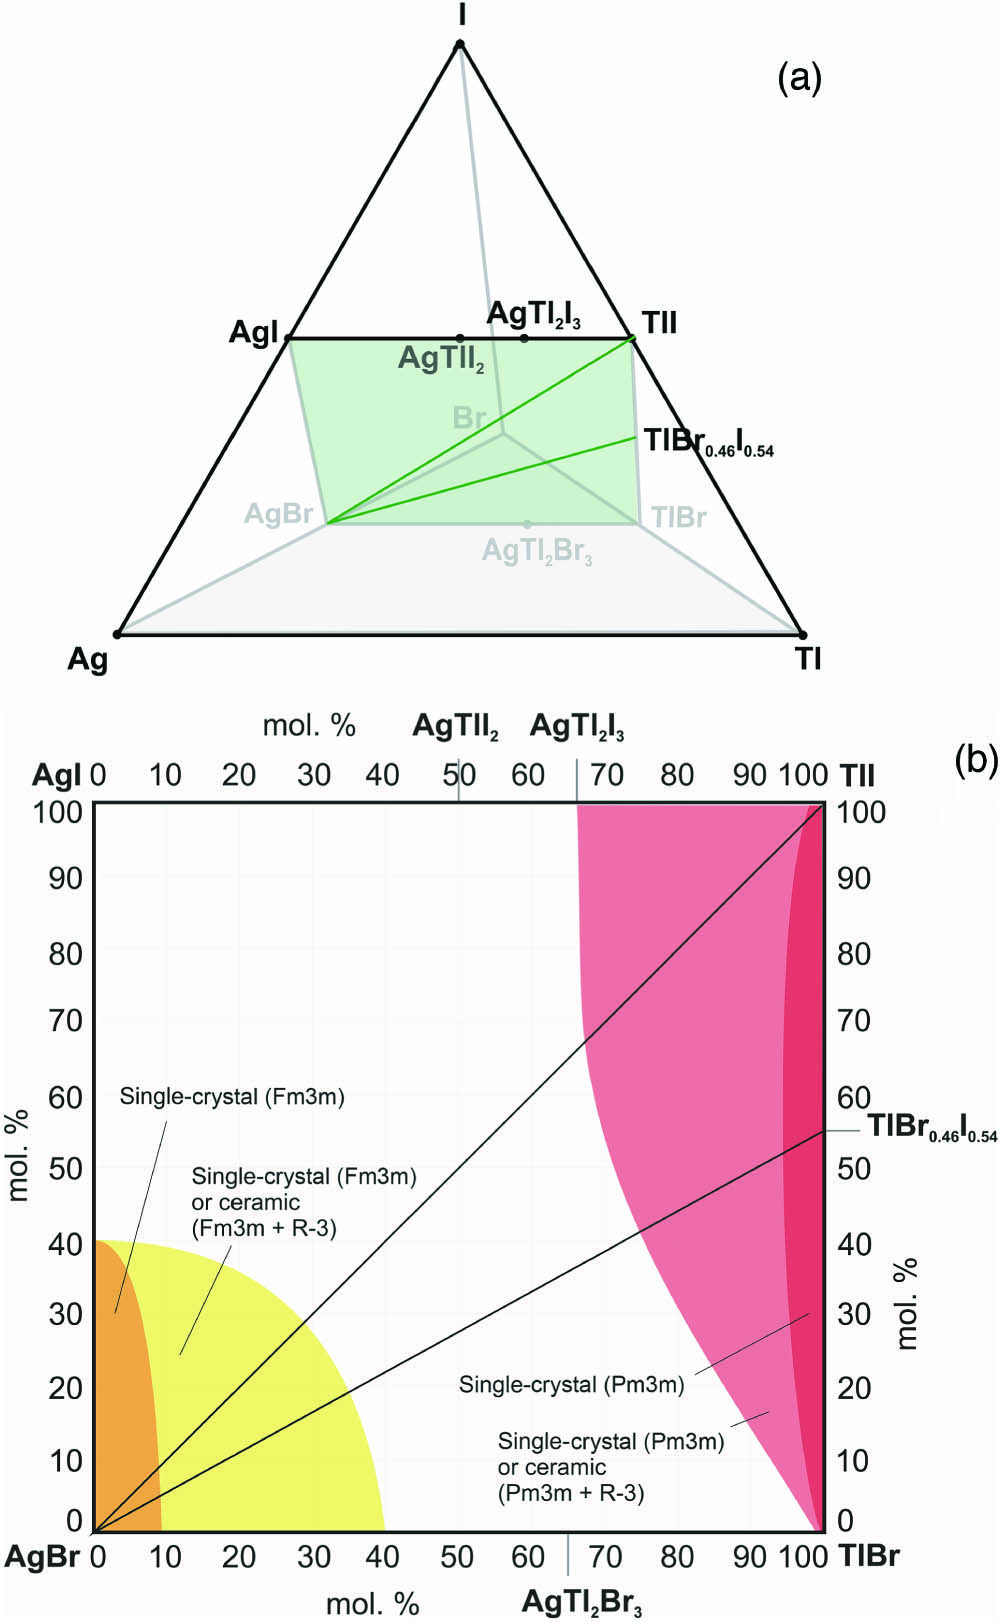 (a) Concentration tetrahedron of Ag–Tl–Br–I and (b) isothermal cross section of AgBr–AgI–TlI–TlBr.